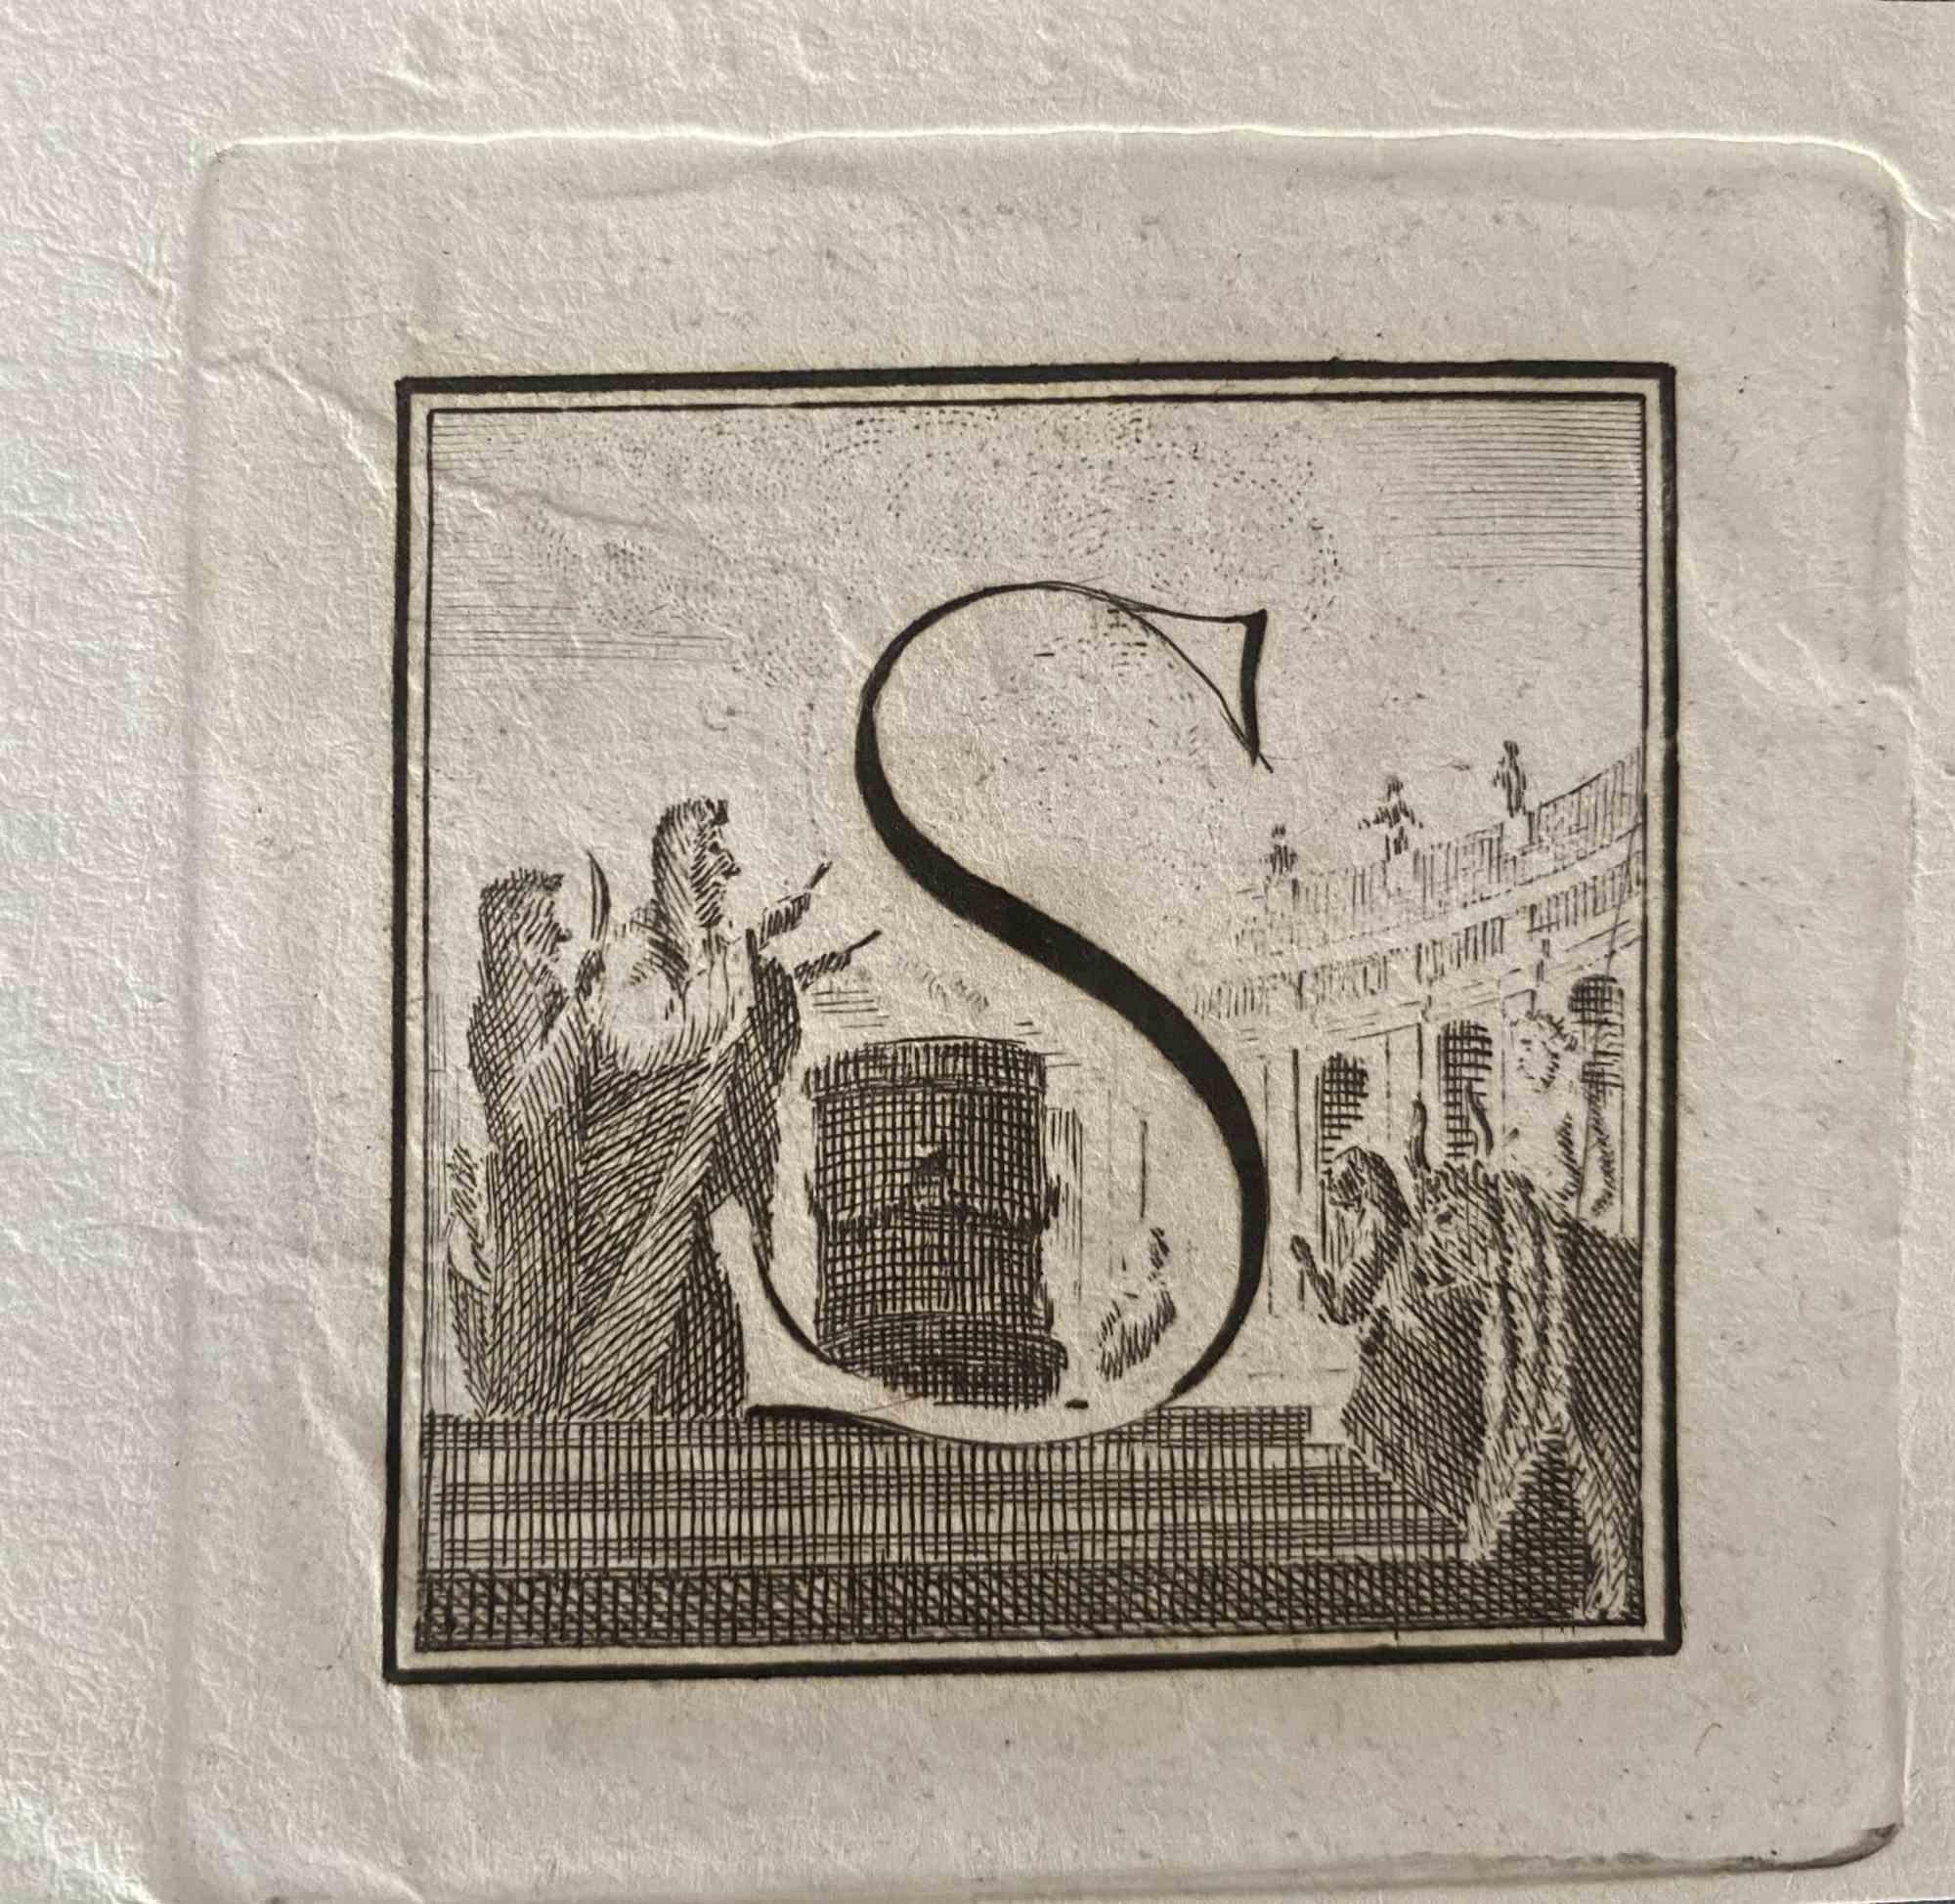 Unknown Figurative Print - Capital Letter for Antiquities of Herculaneum Exposed - End of the 18th century